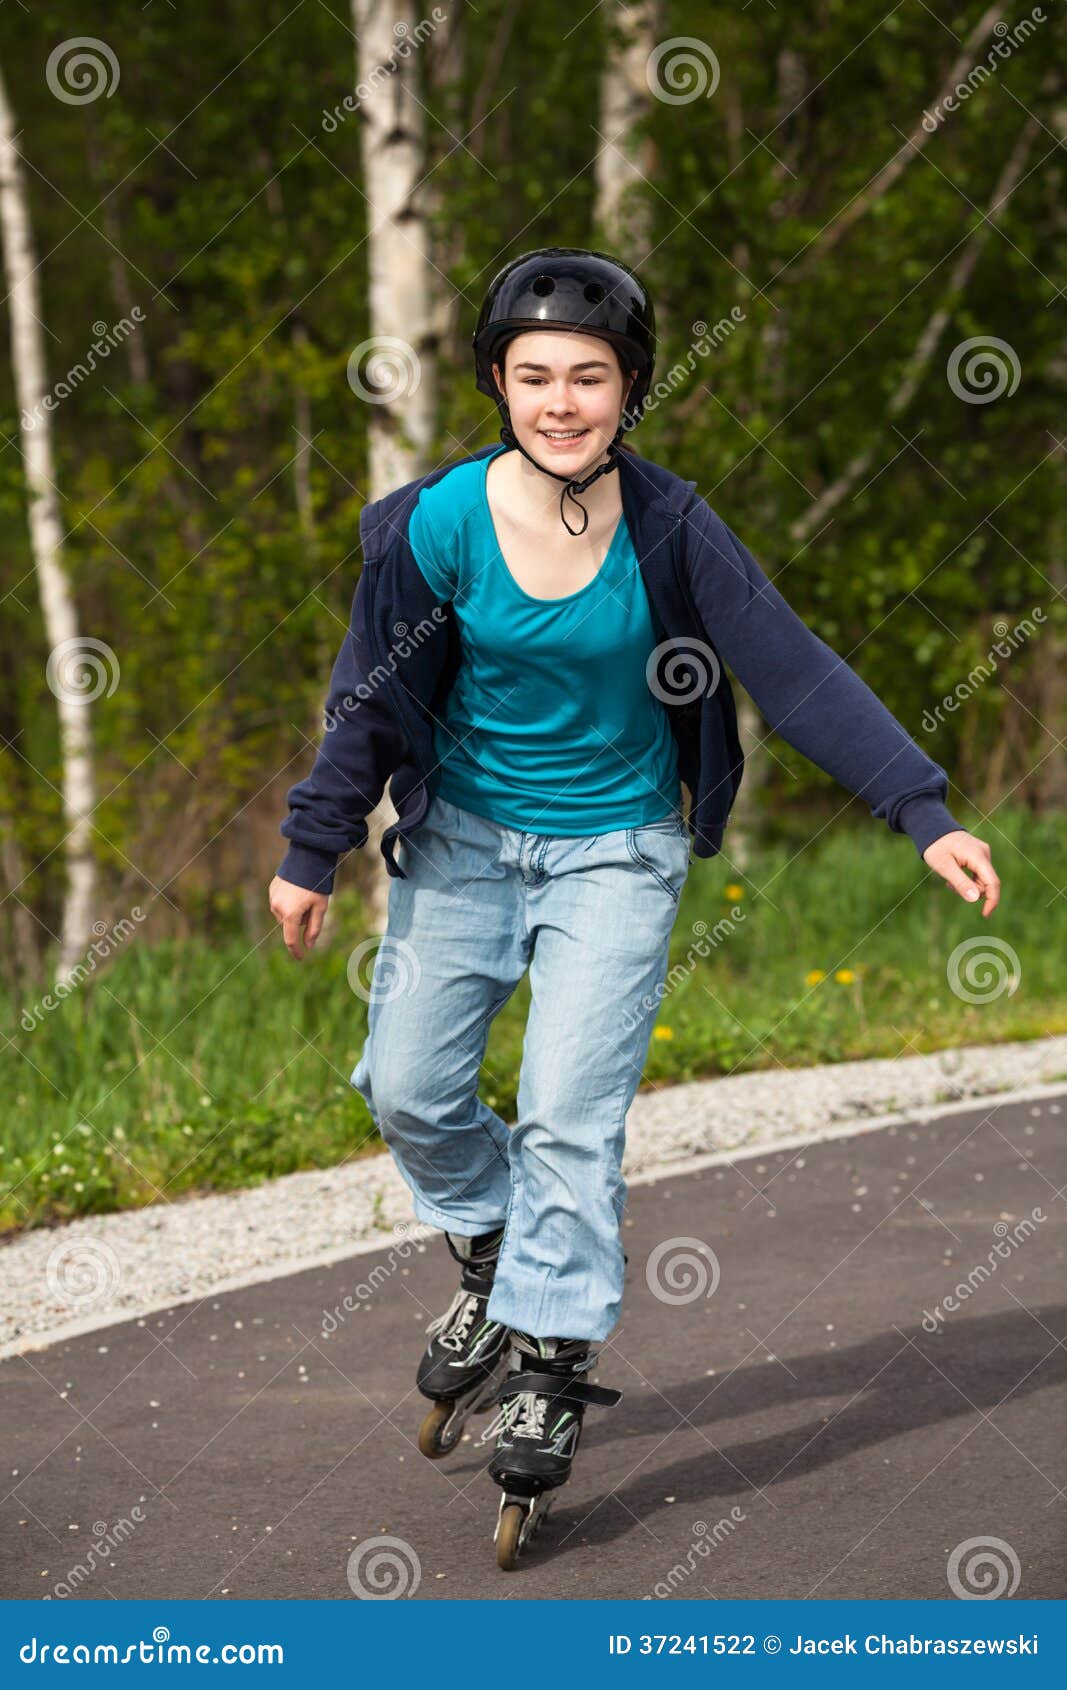 Girl on rollerblades stock photo. Image of female, rollerskating - 37241522